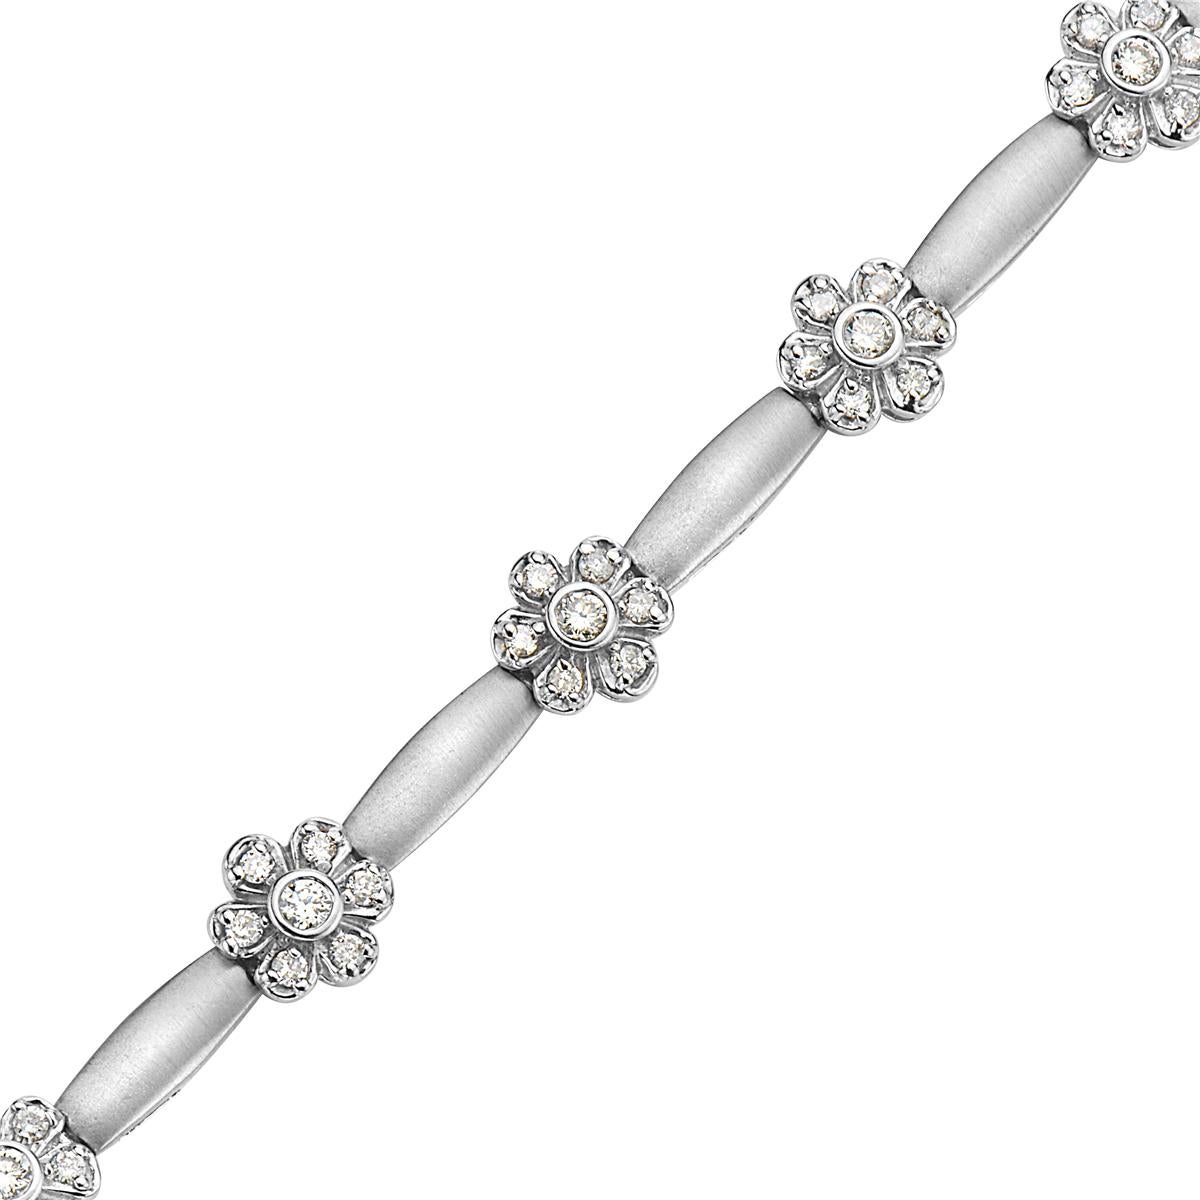 This bracelet features 1.5 carats of diamonds set in 14K matte white gold. 7 inch length. 18 grams total weight. 


Viewings available in our NYC showroom by appointment.